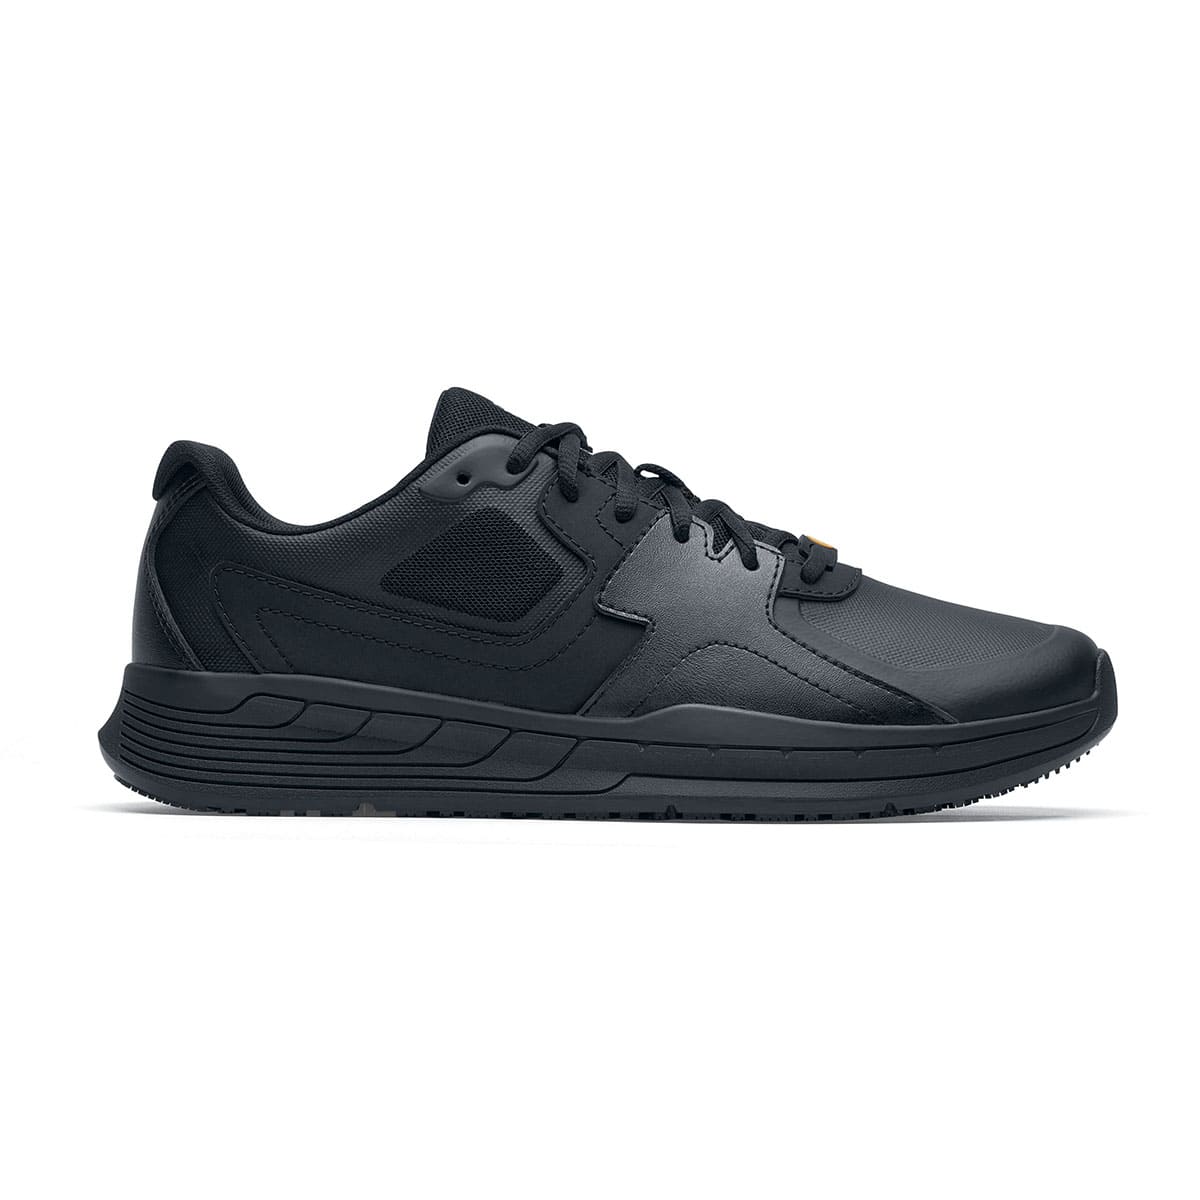 The Shoes for Crews Condor II Unisex Black trainers feature a slip-resistant outsole and an easy-to-clean, breathable fabric upper with SpillGuard protection, seen from the right.